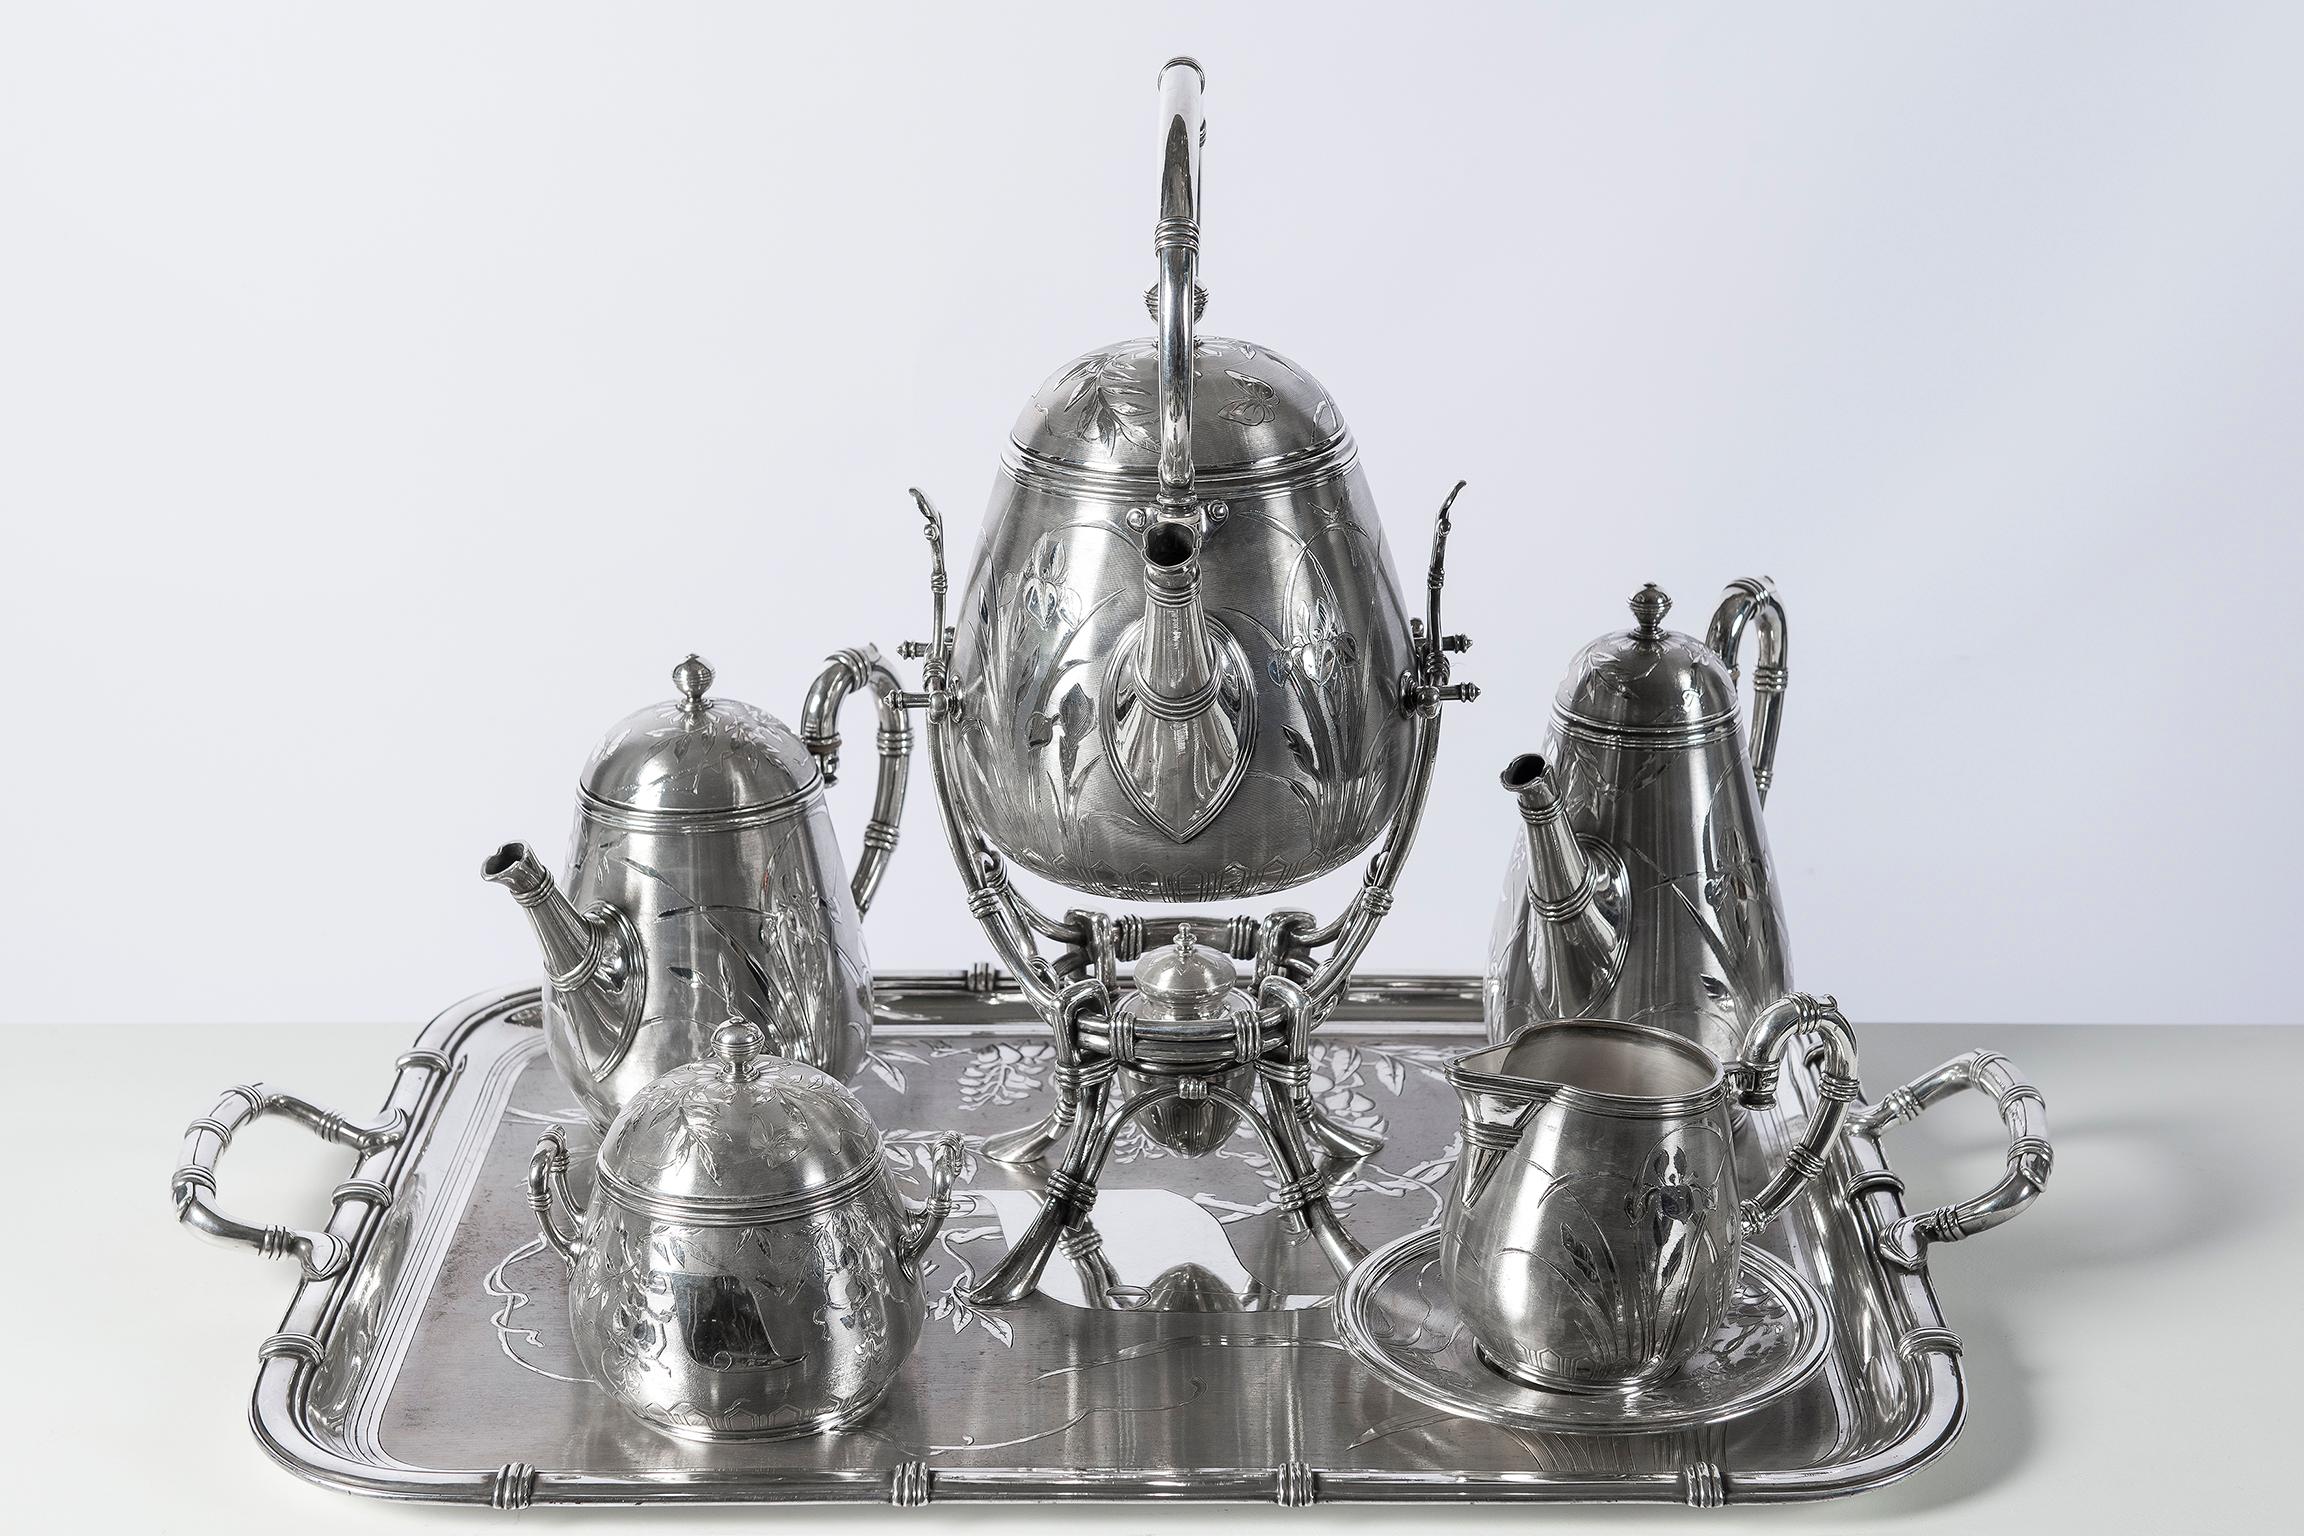 Silver-plate tea and coffee set, bamboo model by Christofle, France, circa 1890.
1 tray, 1 samovar, 1 teapot, 1 coffeepot, 1 sugar bowl and 1 milk jug.
All pieces are signed.